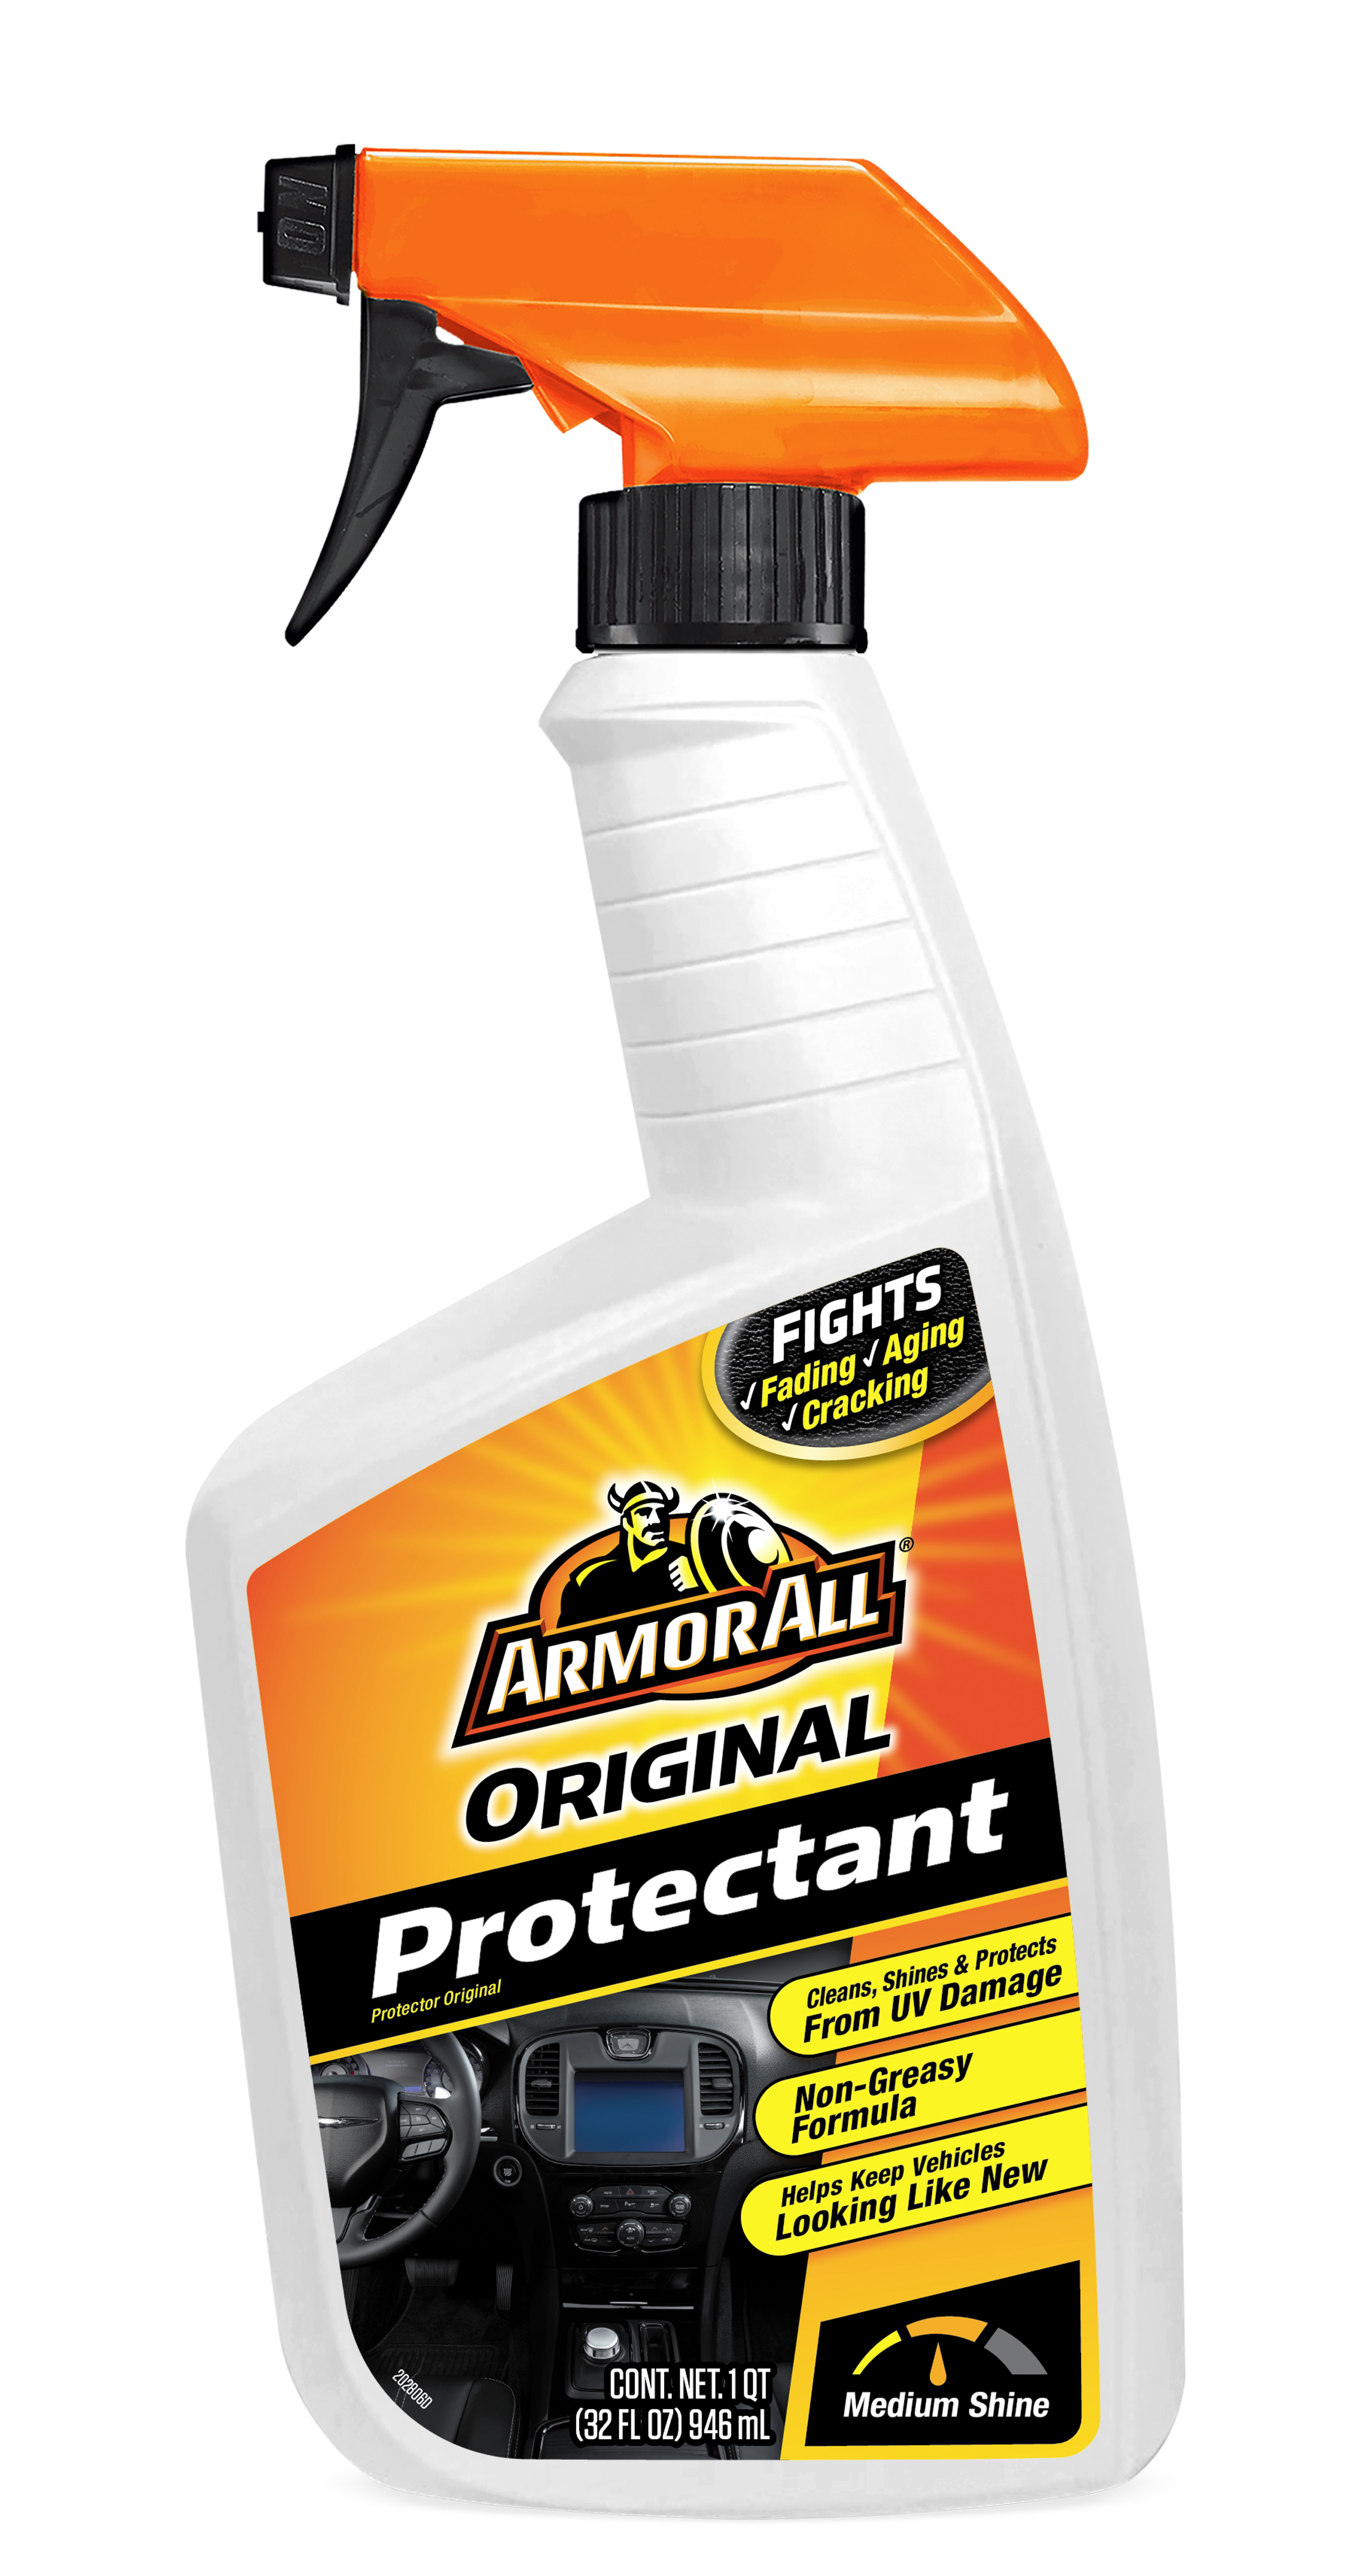 Armor All Cleaning Wipes in a Pouch, 60 Count - Car Interior